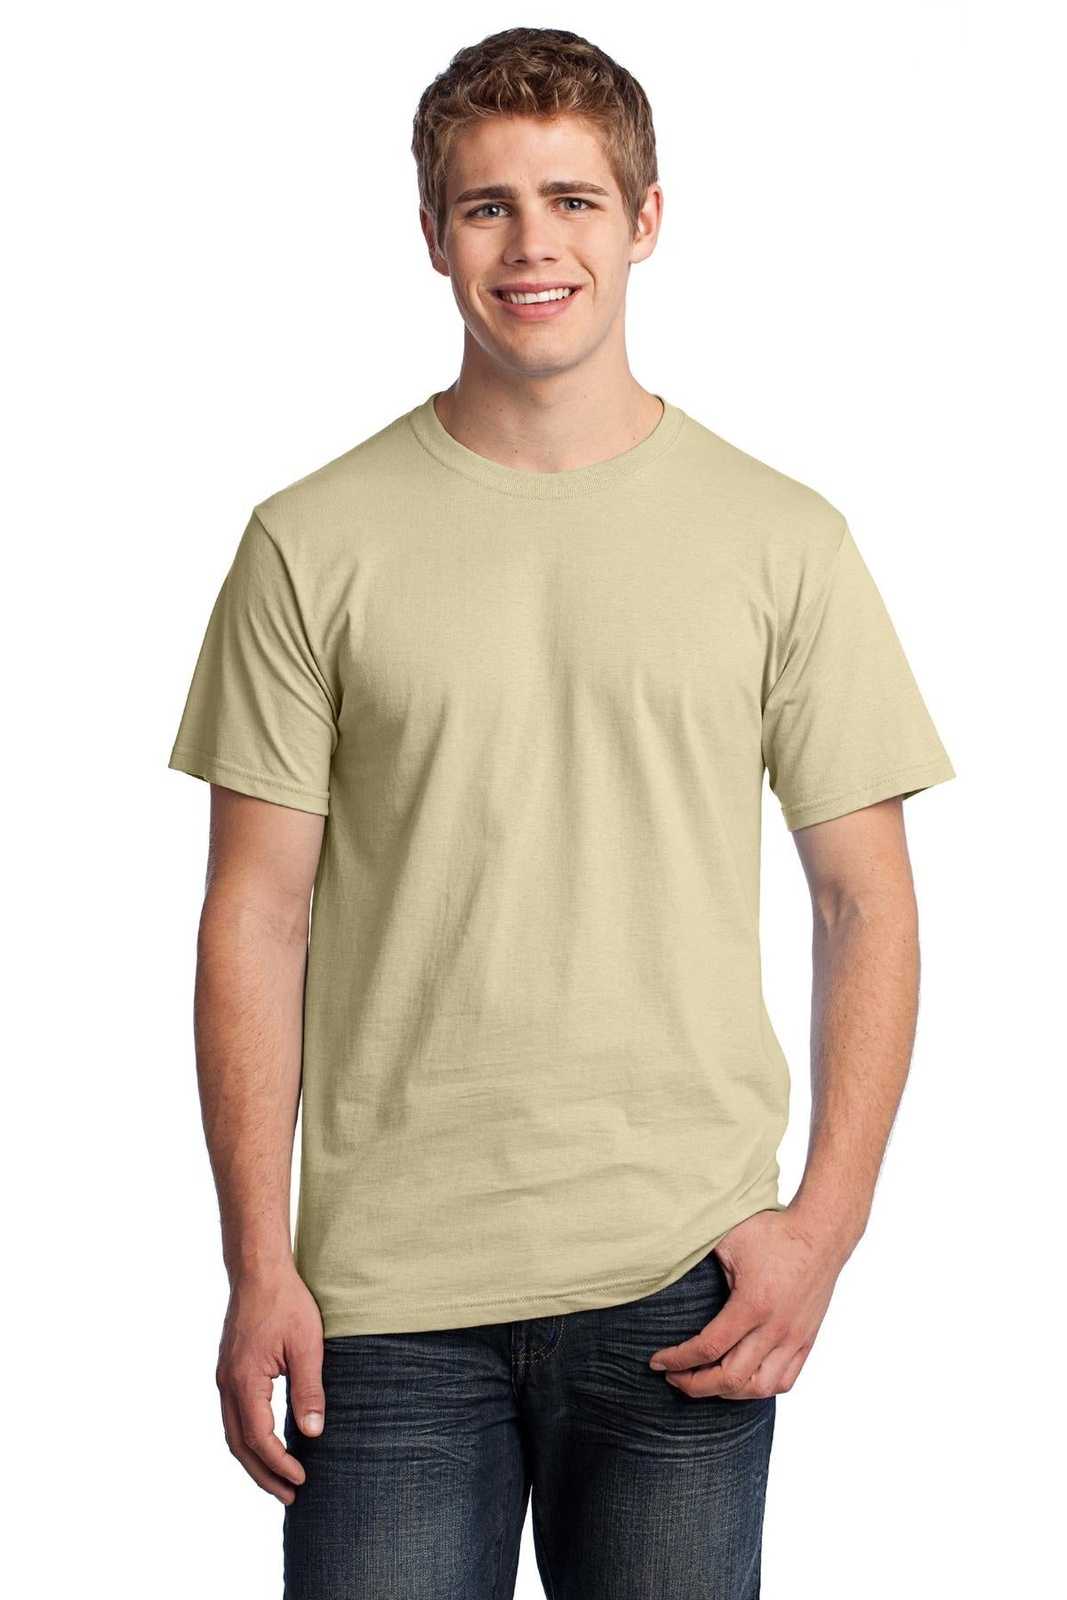 Fruit of the Loom 3930 HD Cotton 100% Cotton T-Shirt - Natural - HIT a Double